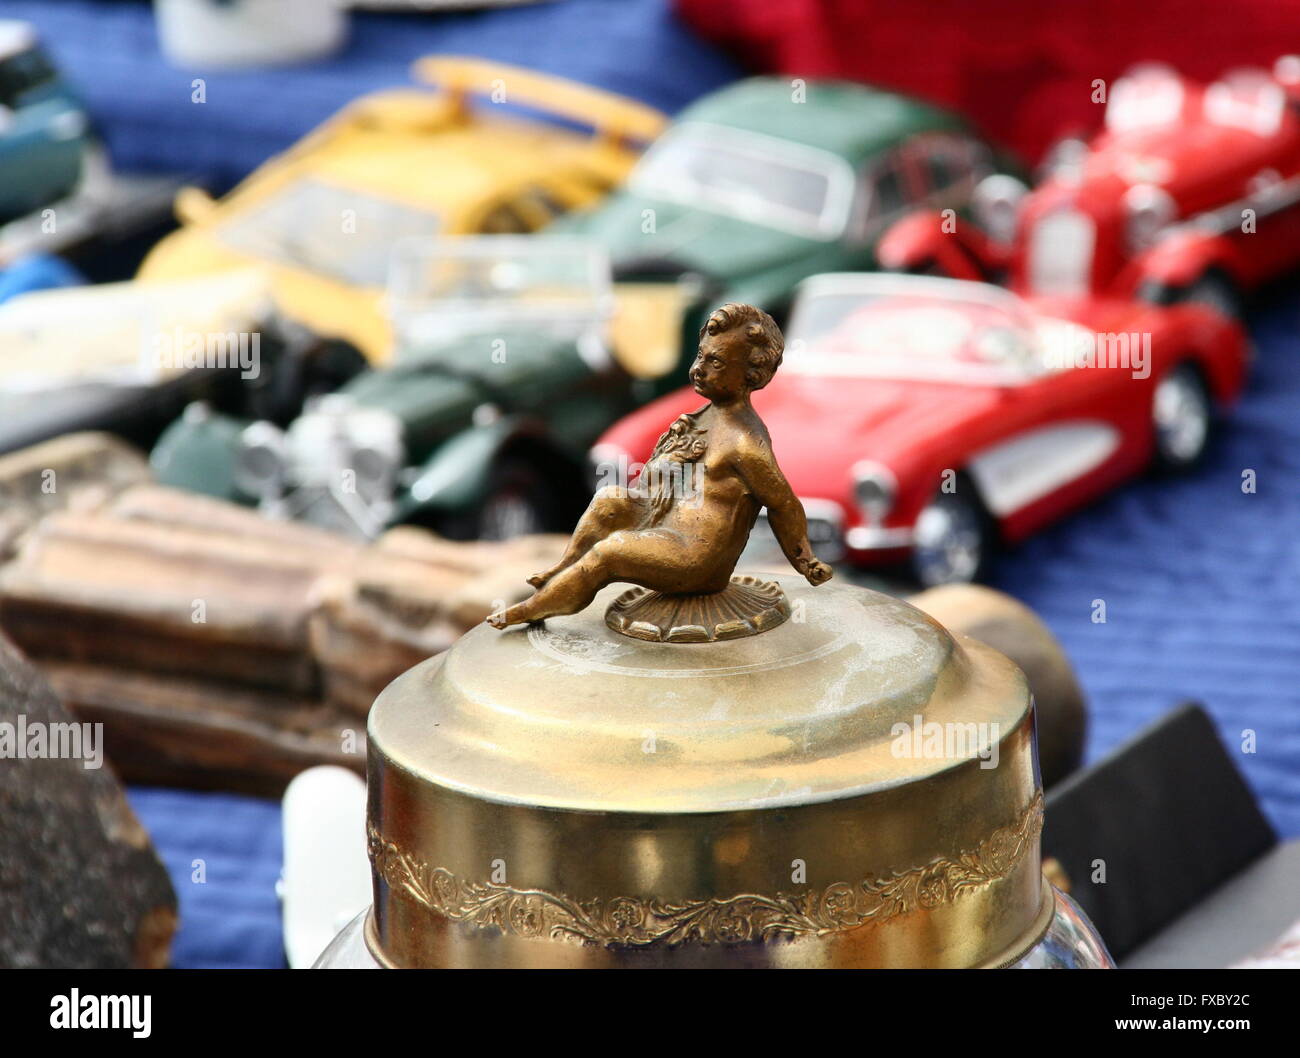 Small brass vintage figure of a child in the foreground with antique toy cars, flea market, Germany. Stock Photo